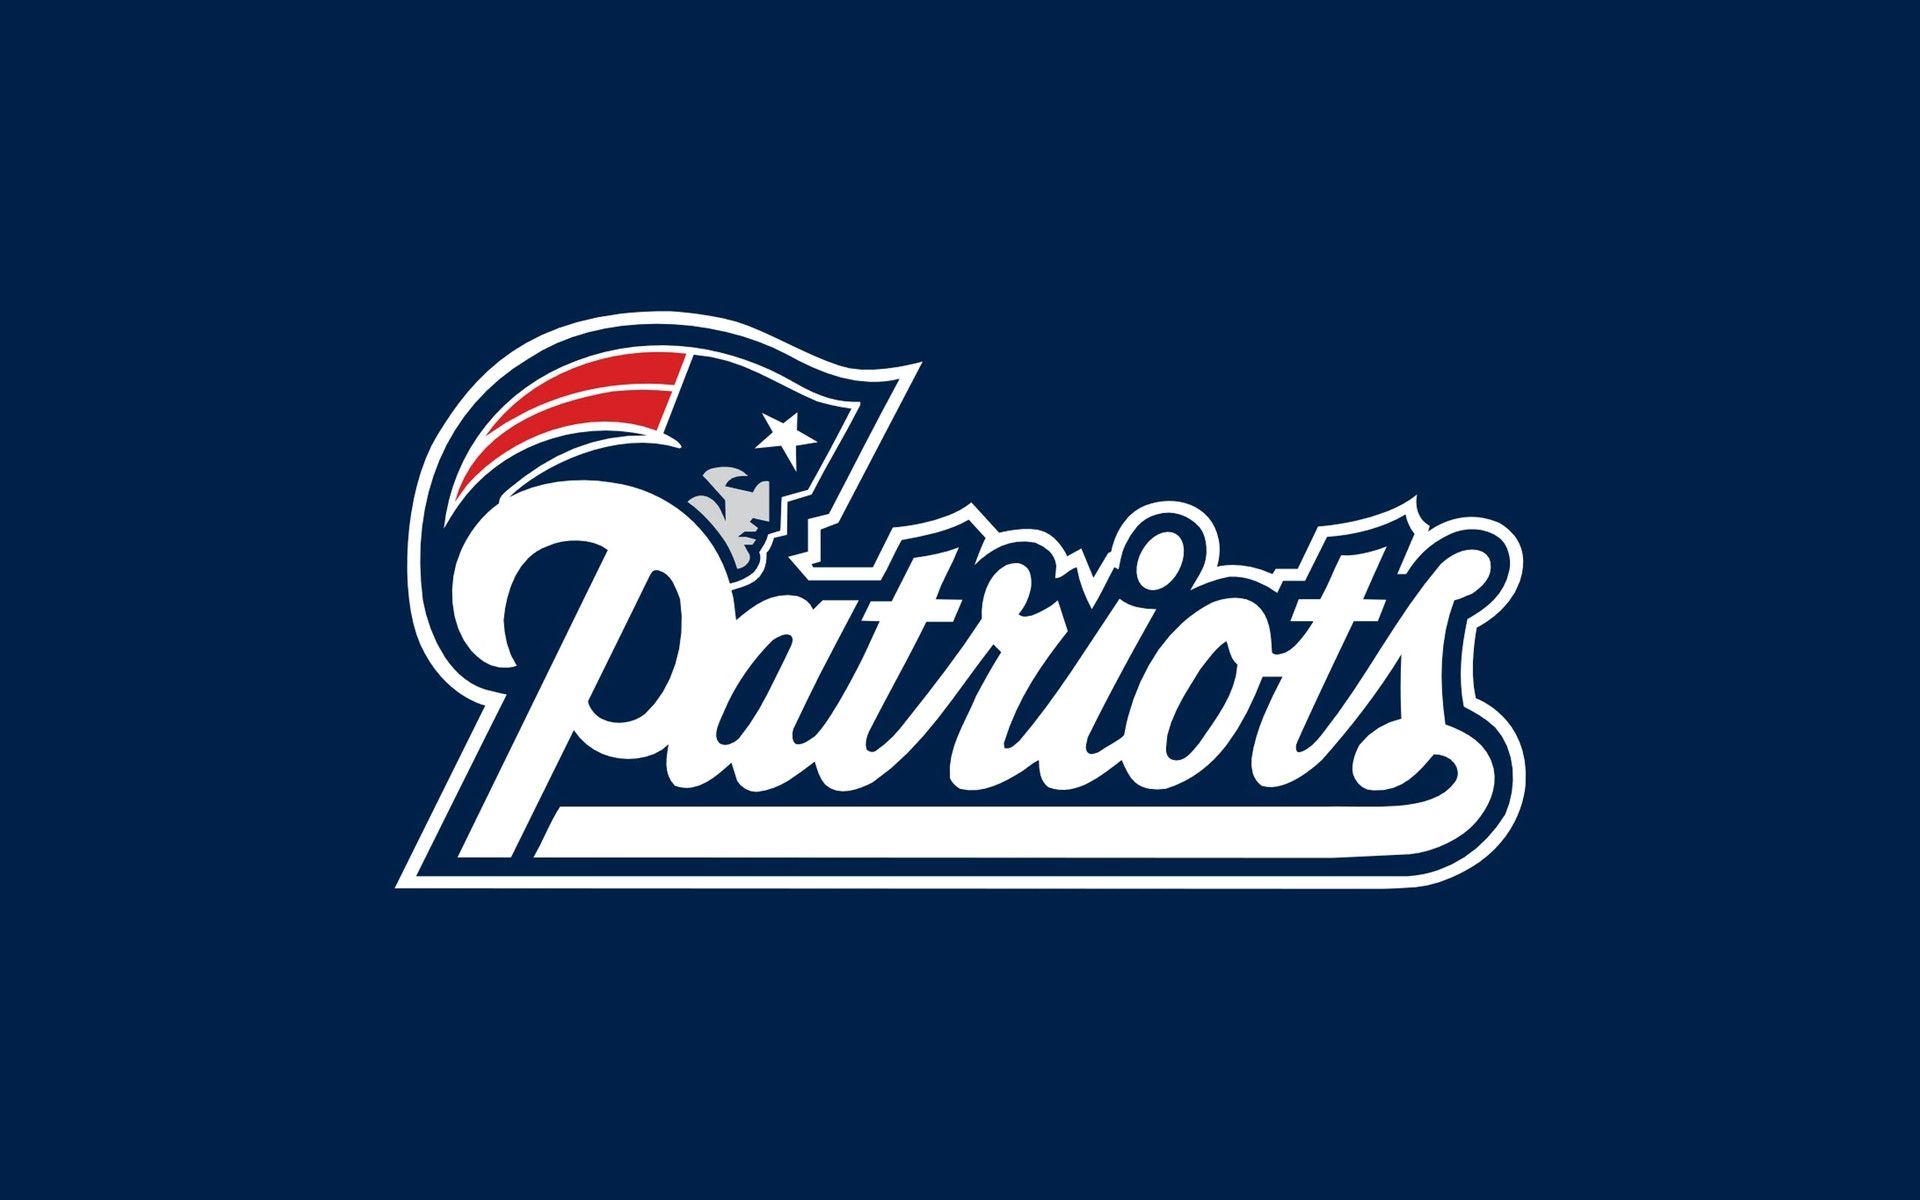 More New England Patriots wallpapers wallpapers